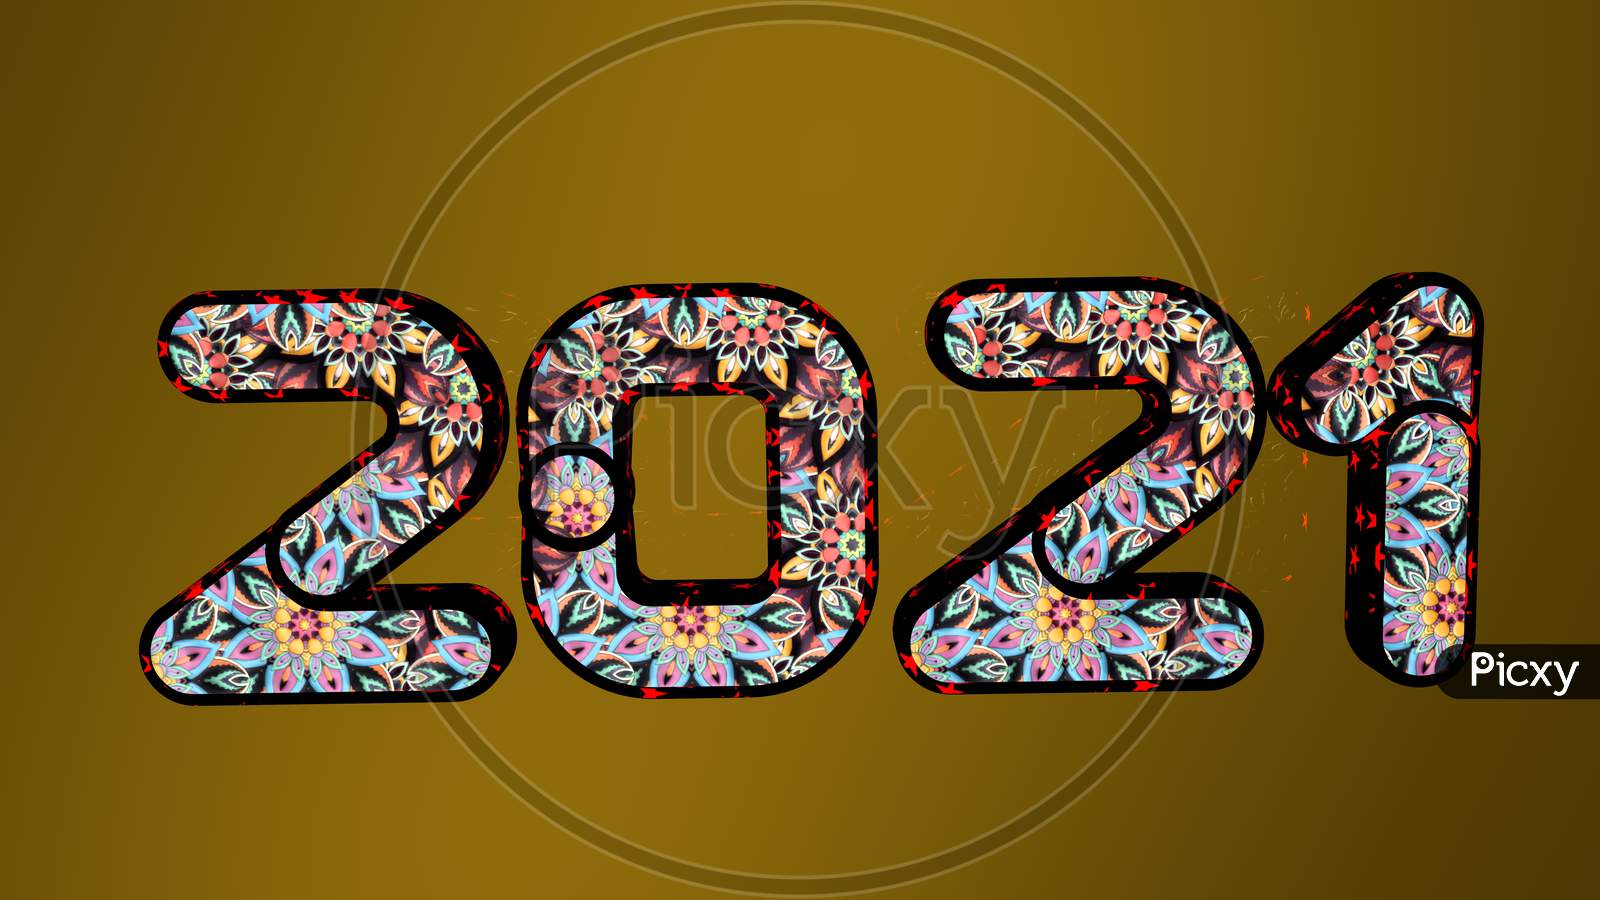 2020 Typography On A Golden Background.